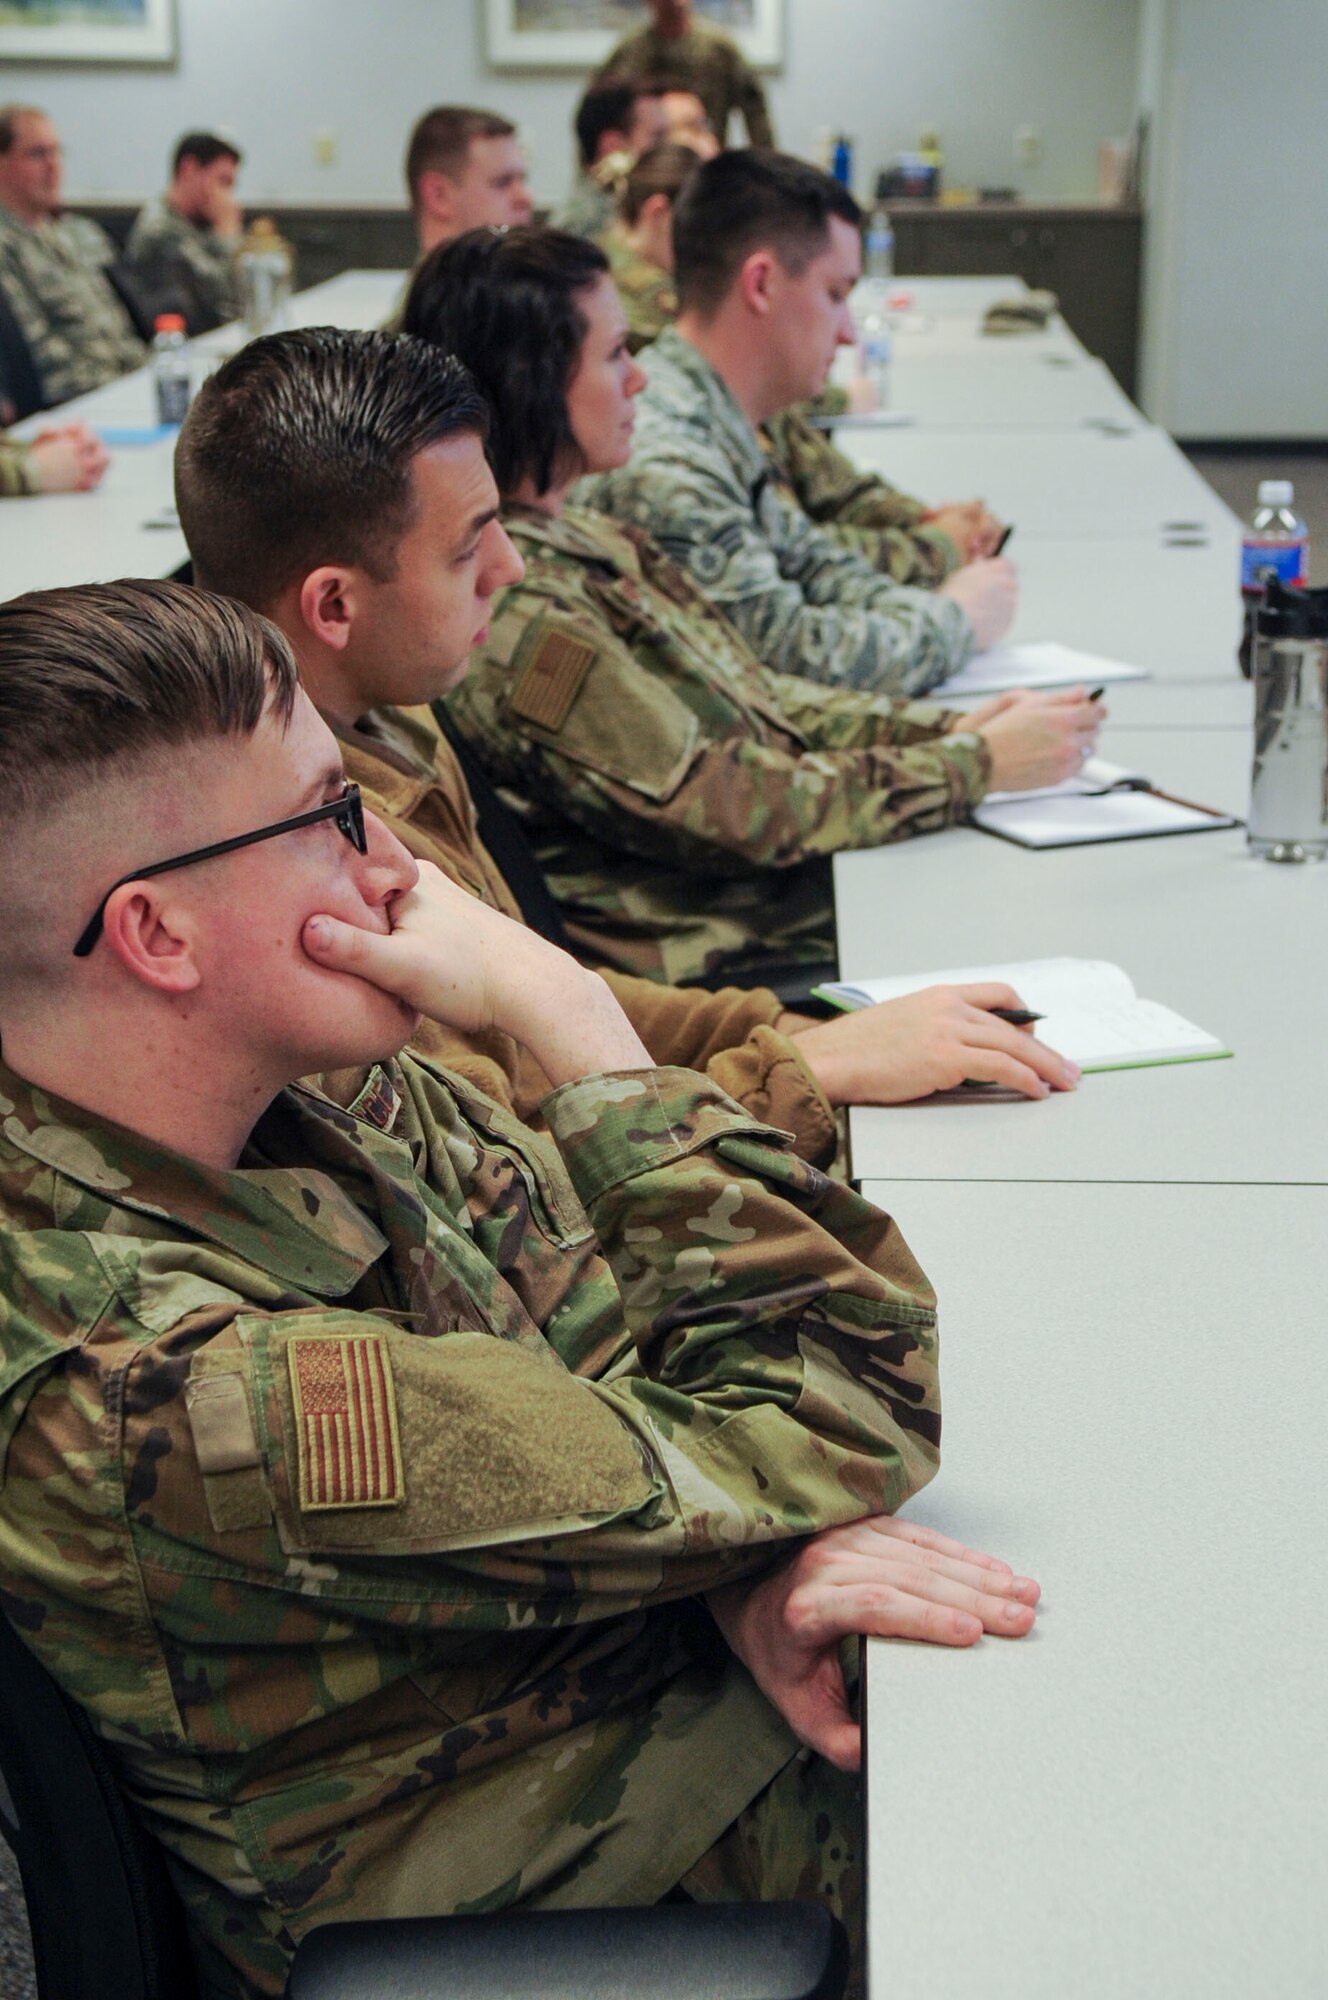 Senior Airman Christopher Shover, National Air and Space Intelligence Center, Special Missions Division knowledge manager, listens to a briefing during a First Sergeant’s Panel on the progressive discipline model at Wright-Patterson Air Force Base, Ohio, Dec. 11, 2019. During the panel, First Sergeants discussed the progressive discipline model and different methods for mentoring subordinates. (U.S. Air Force photo by Staff Sgt. Seth Stang)